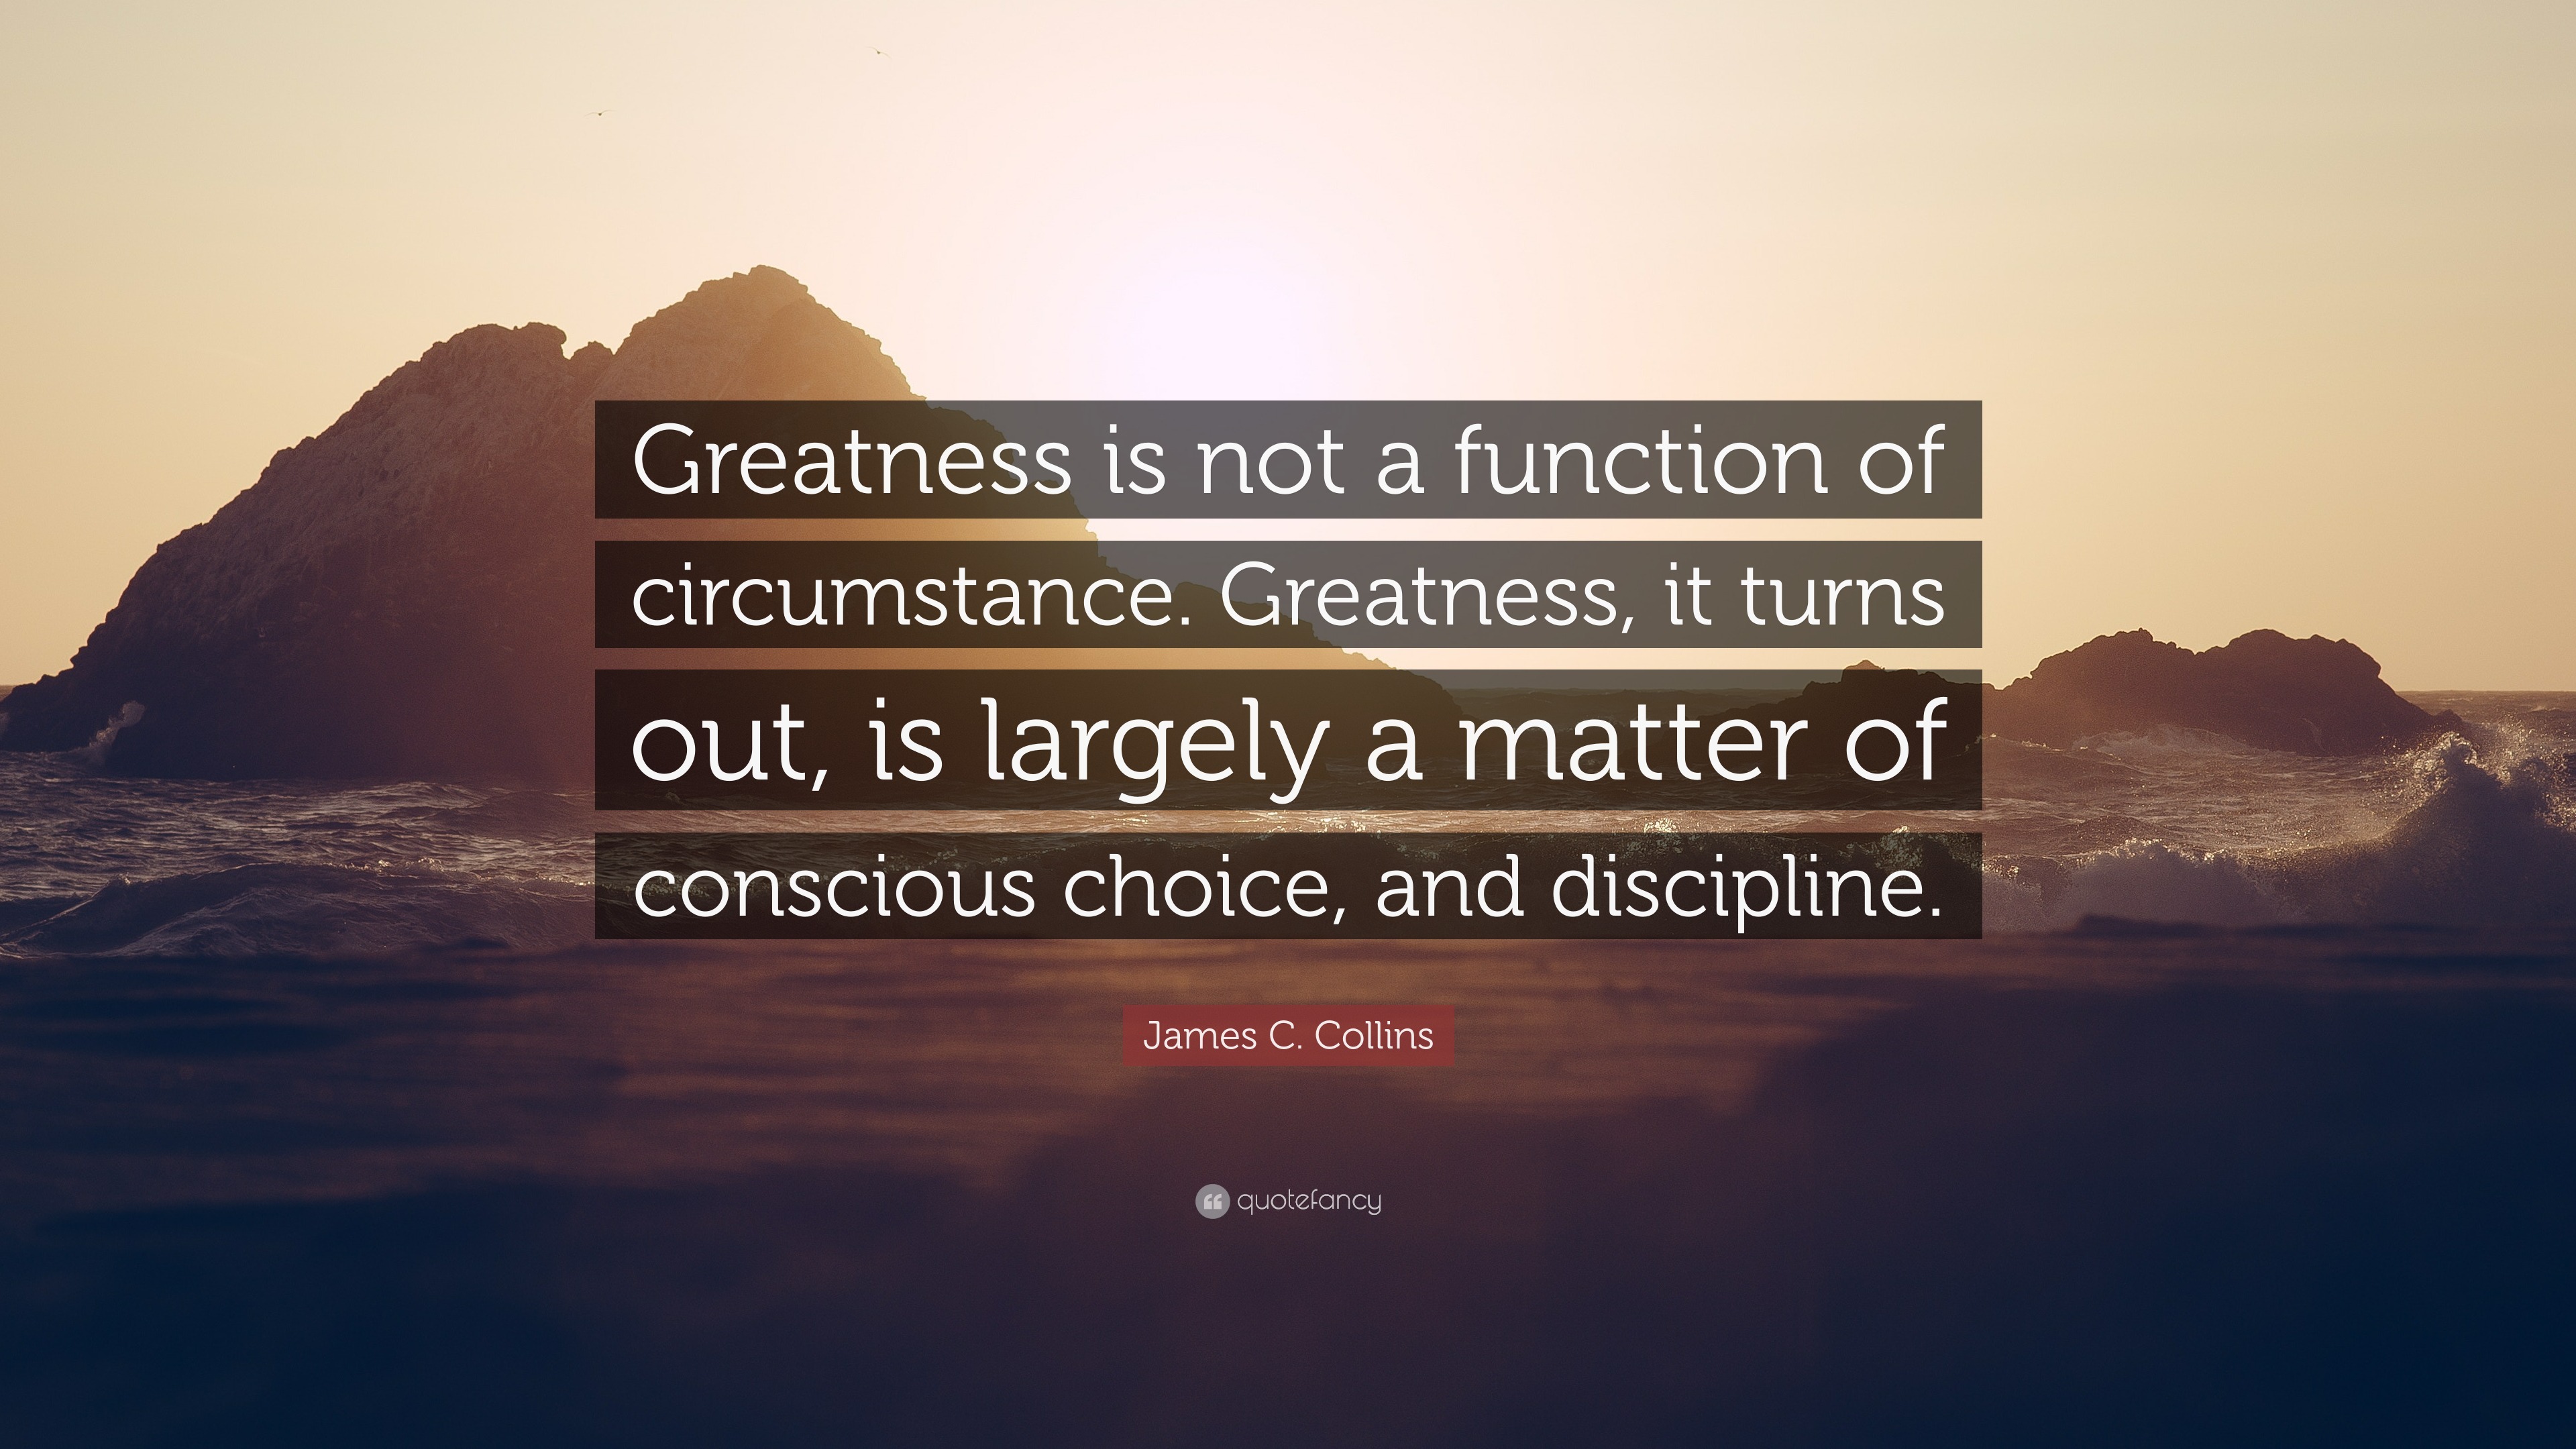 James C. Collins Quote: “Greatness is not a function of circumstance